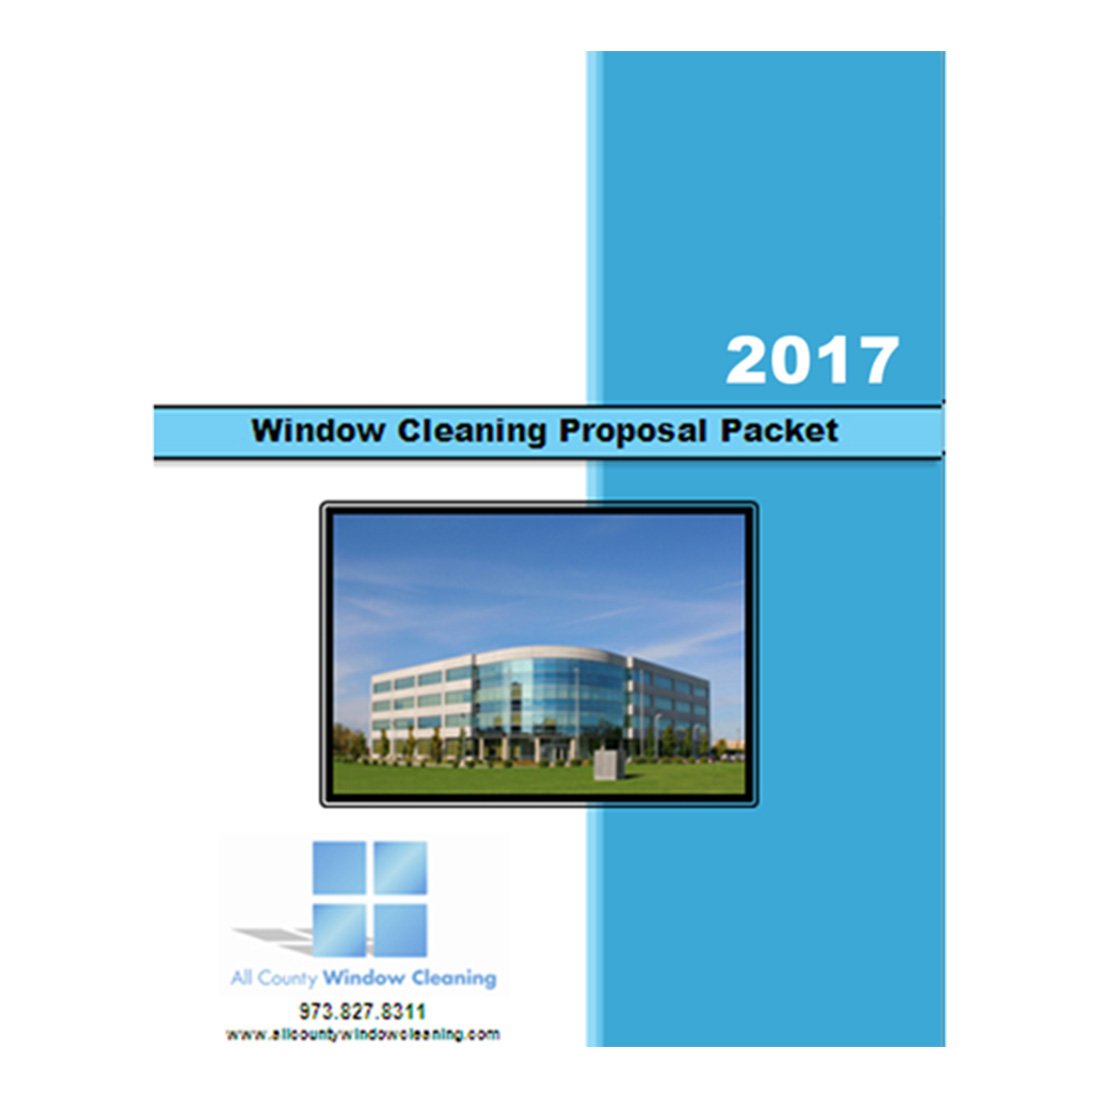 Proposal Manager - Window Cleaning Porposal Packet Front View